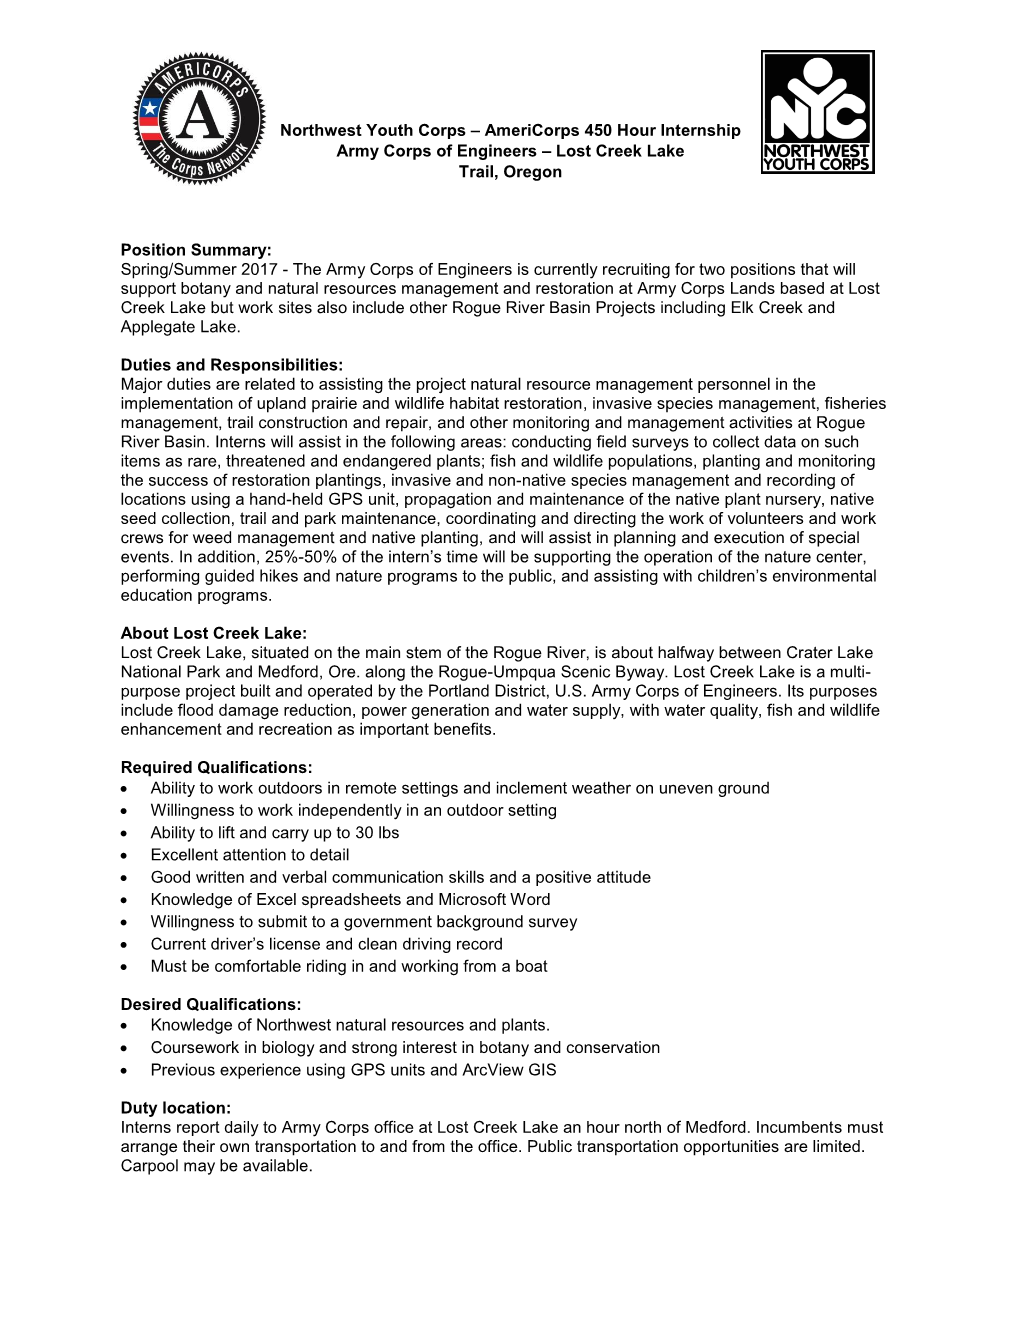 Northwest Youth Corps – Americorps 450 Hour Internship Army Corps of Engineers – Lost Creek Lake Trail, Oregon